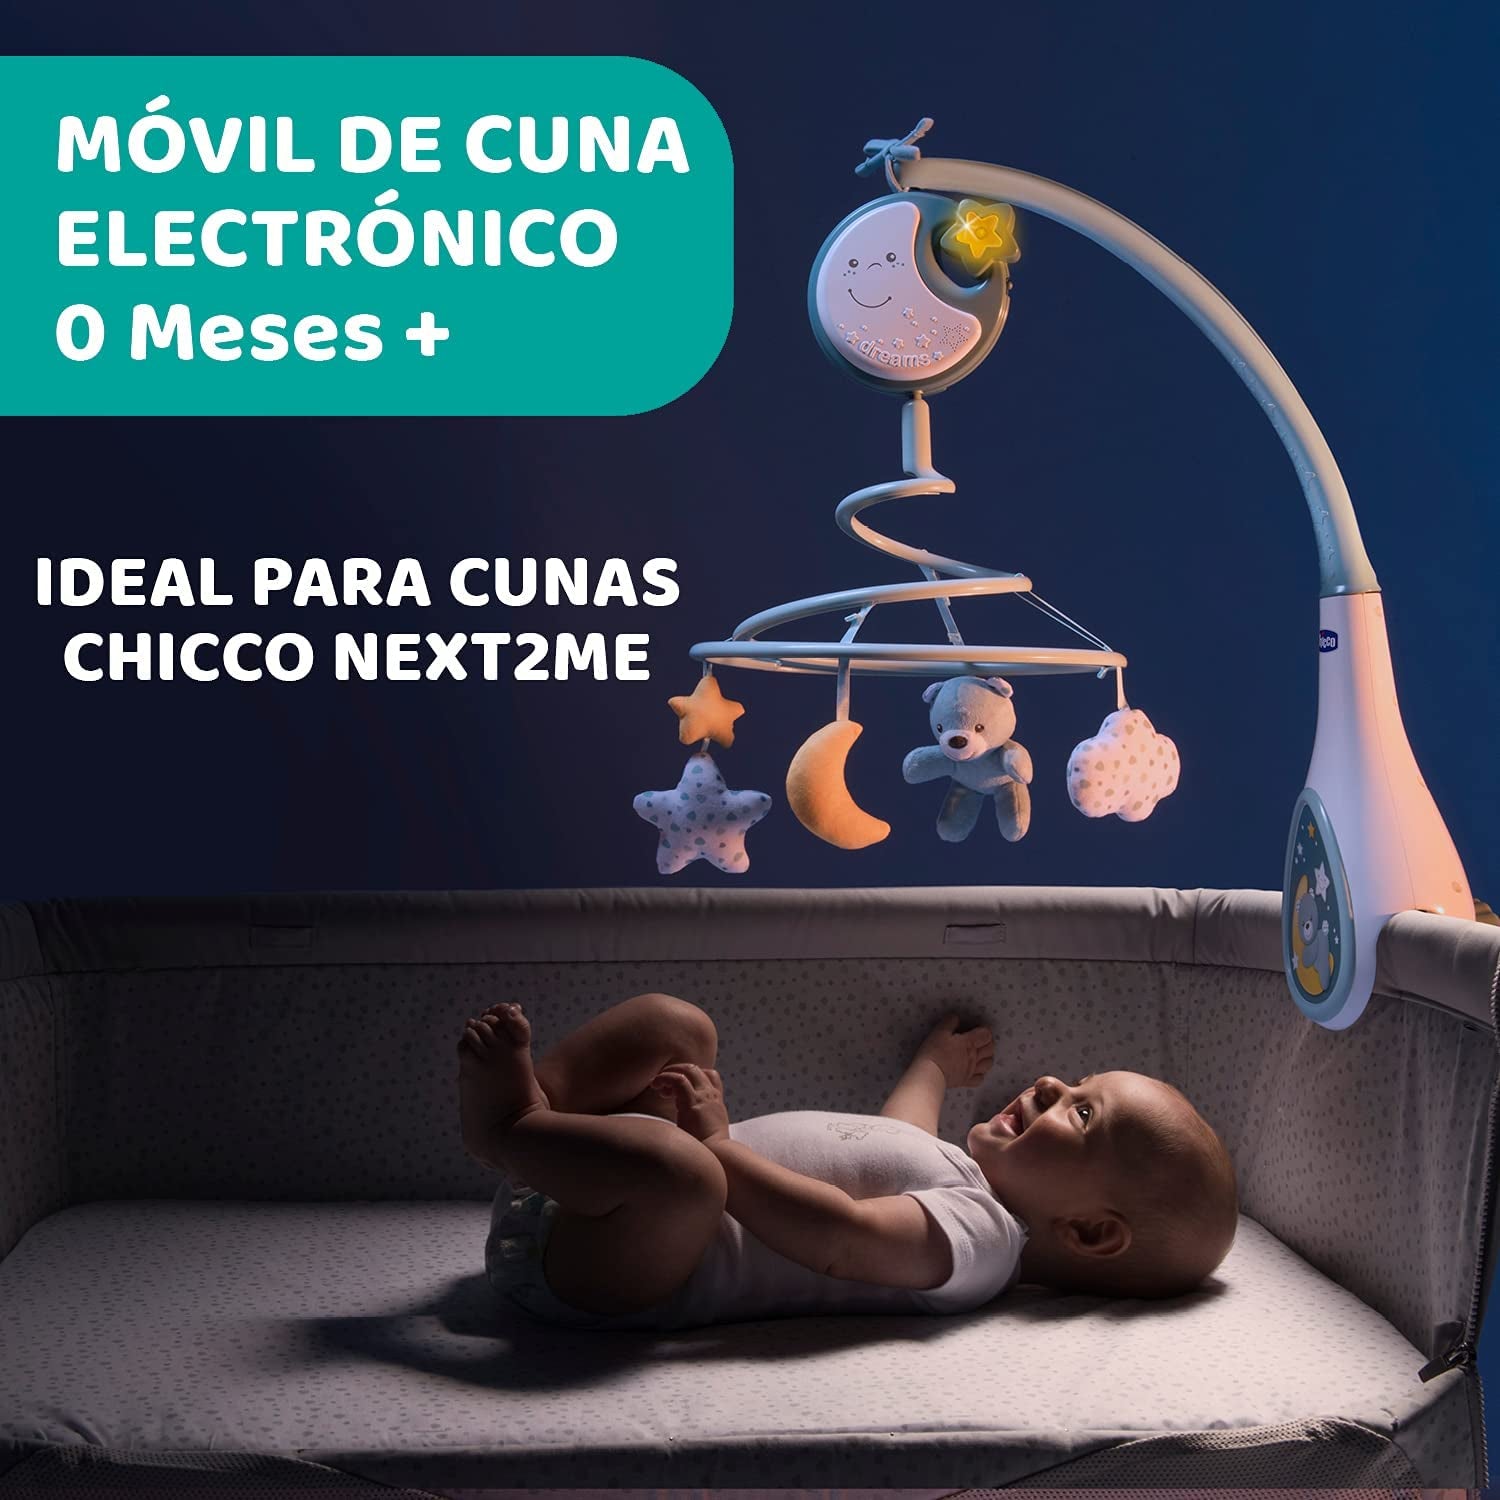 Chicco Next2Dreams Baby Mobile with Music Box for Cot and Bed - 3 in 1 Baby Mobile Compatible with Next2Me Cot, with Sound Effects, Soft Night Light Projector and Classical Music - 0+ Months, Blue